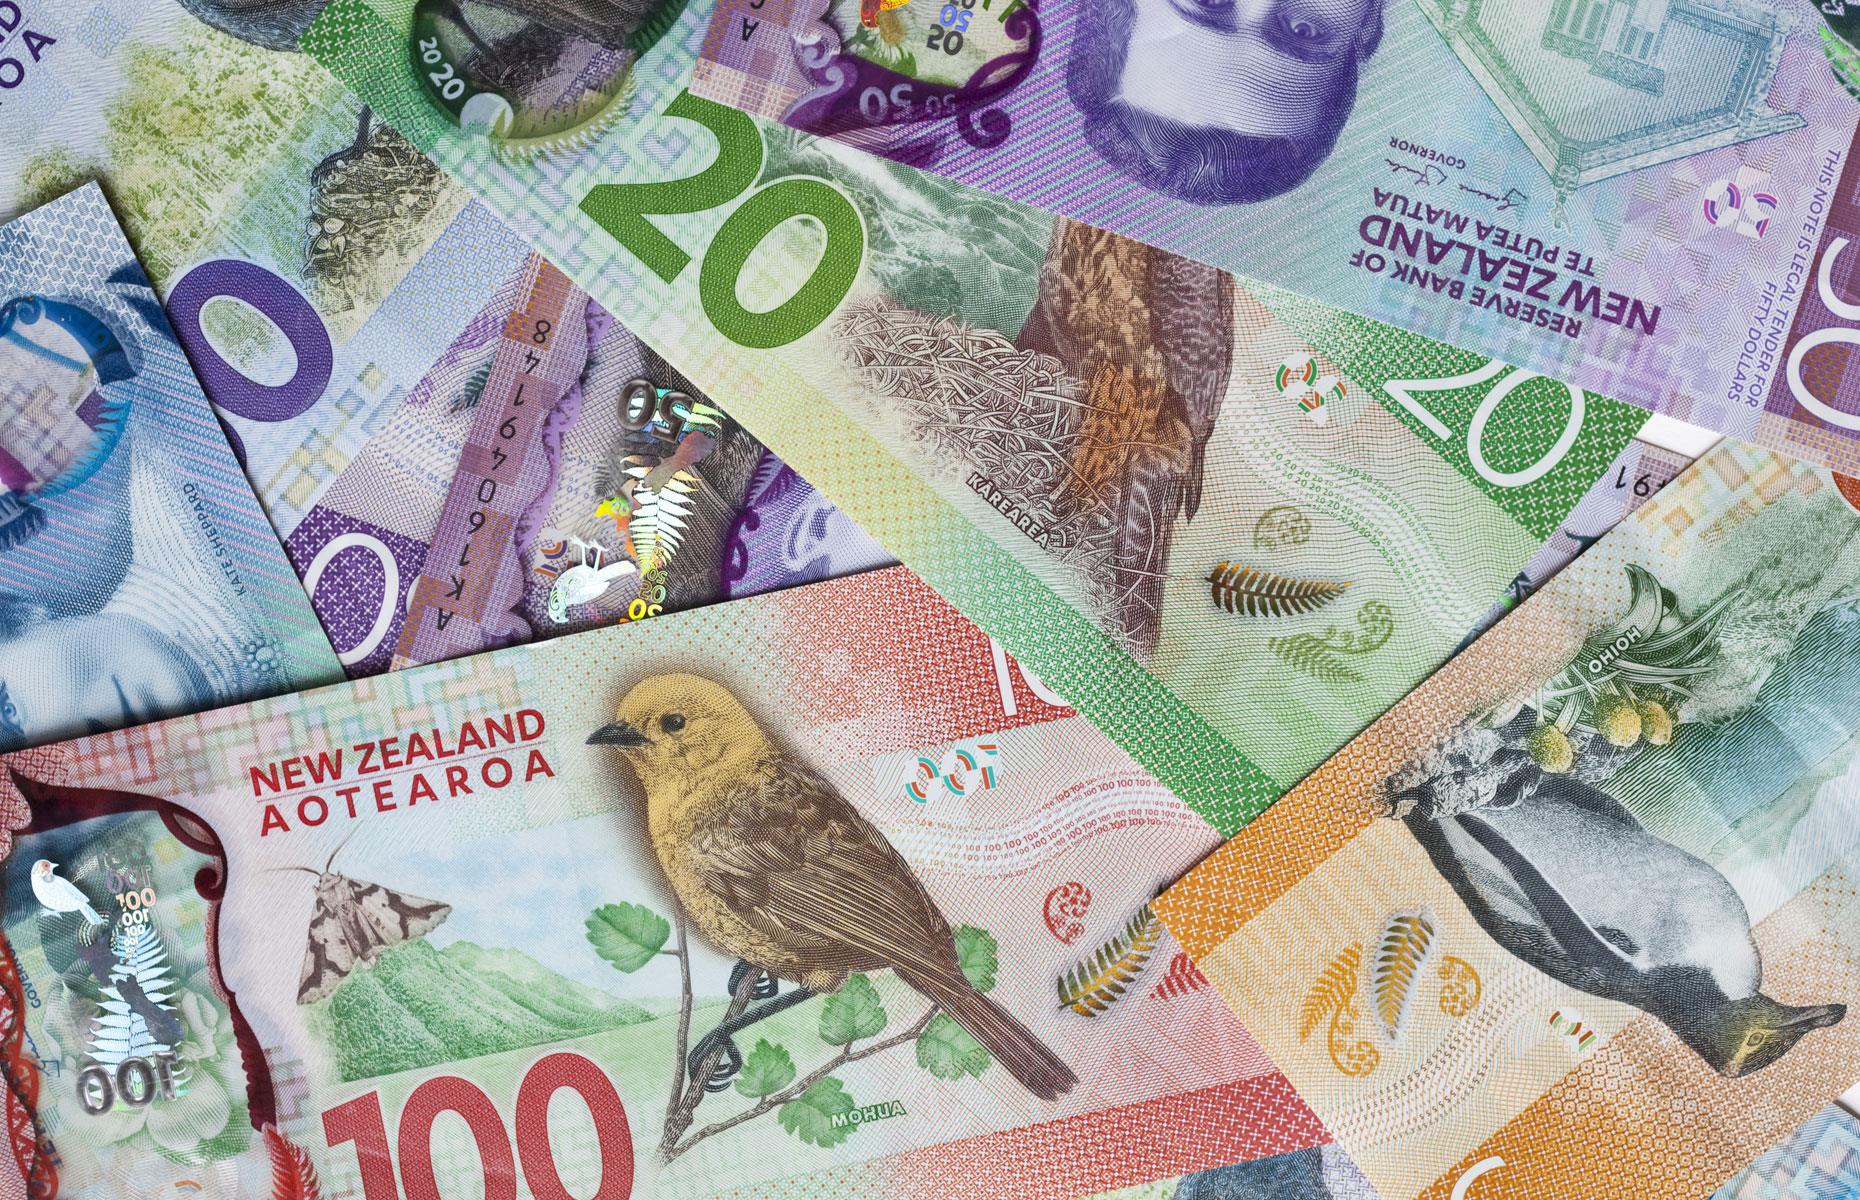 24 countries use tallow-containing polymer in their banknotes